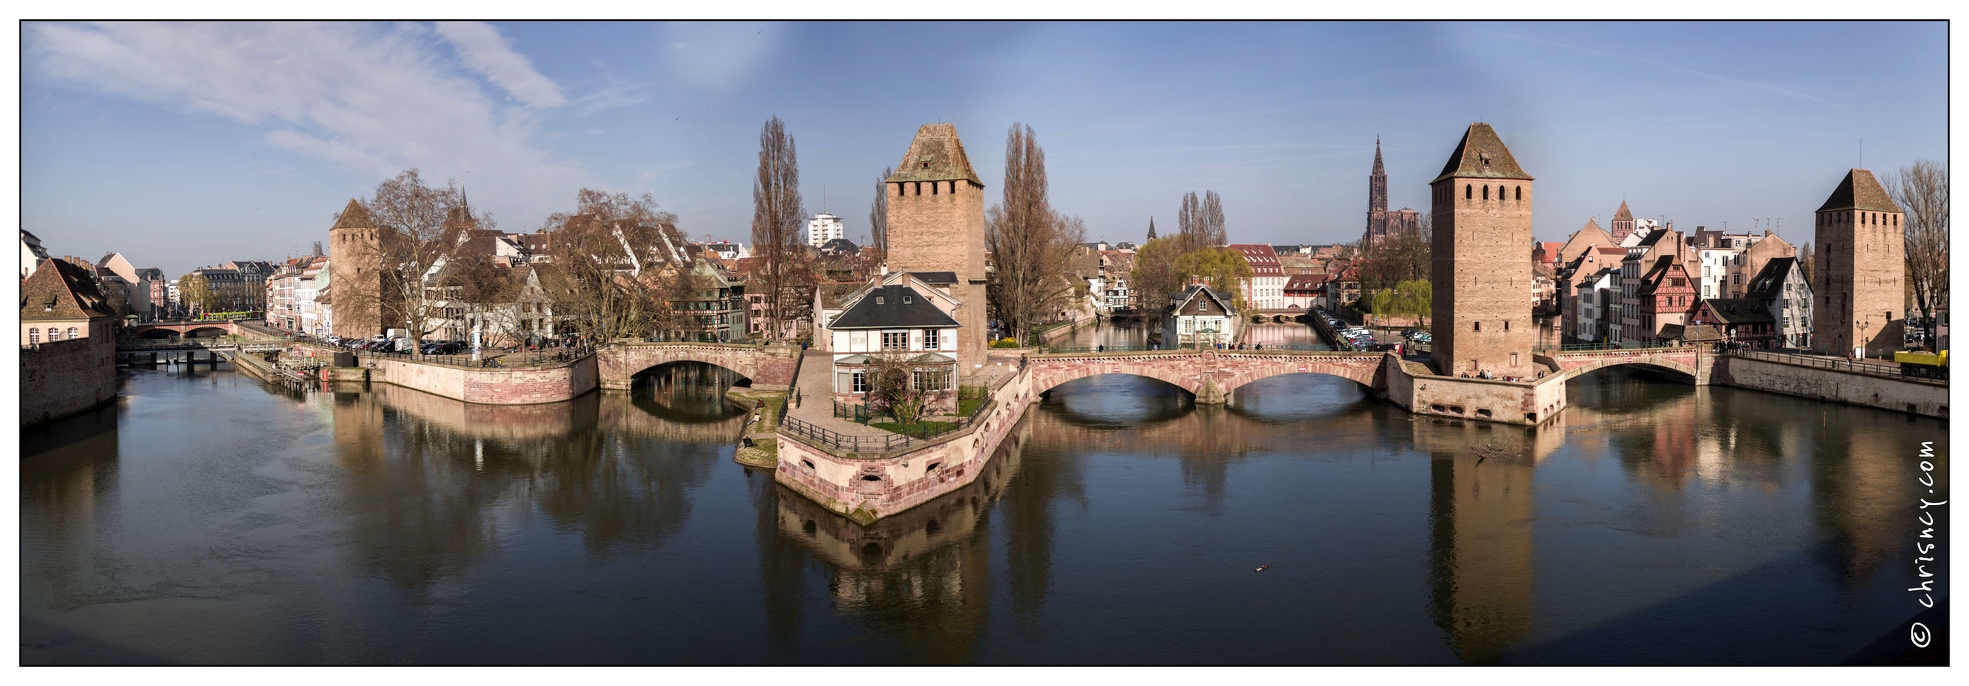 20140310-09_8068-Strasbourg_Ponts_couverts_pano_.jpg